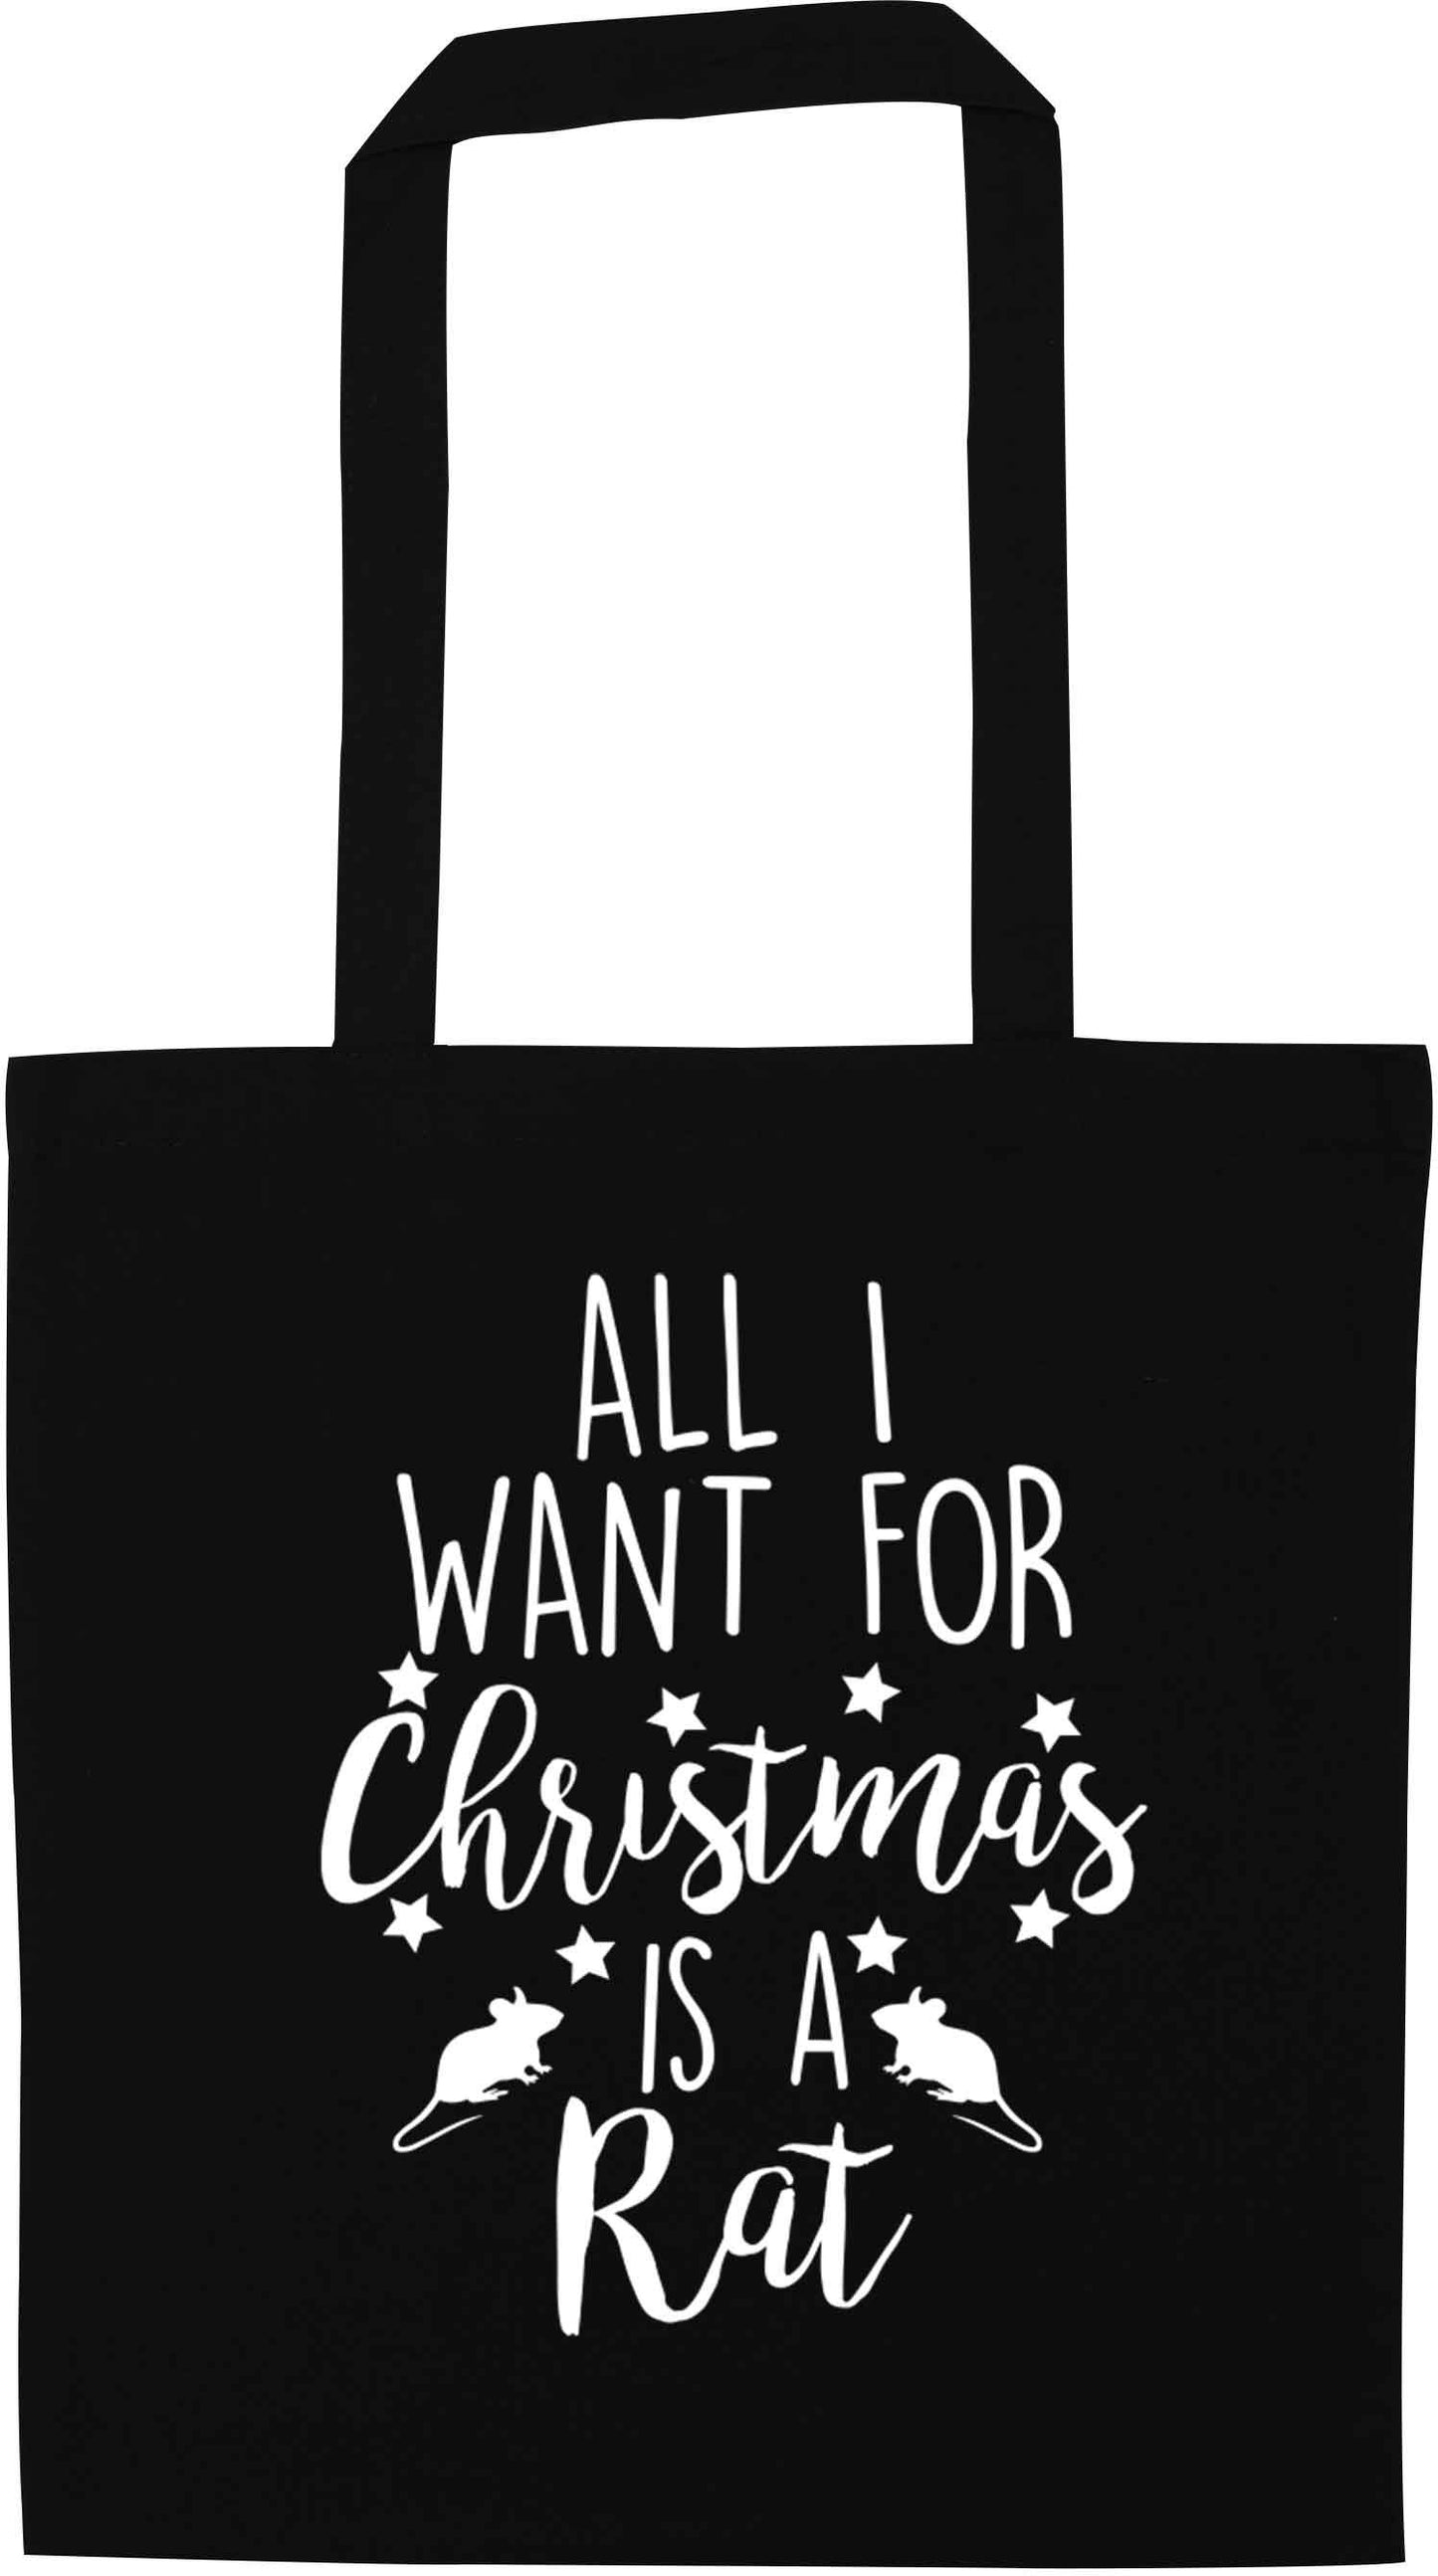 All I want for Christmas is a rat black tote bag